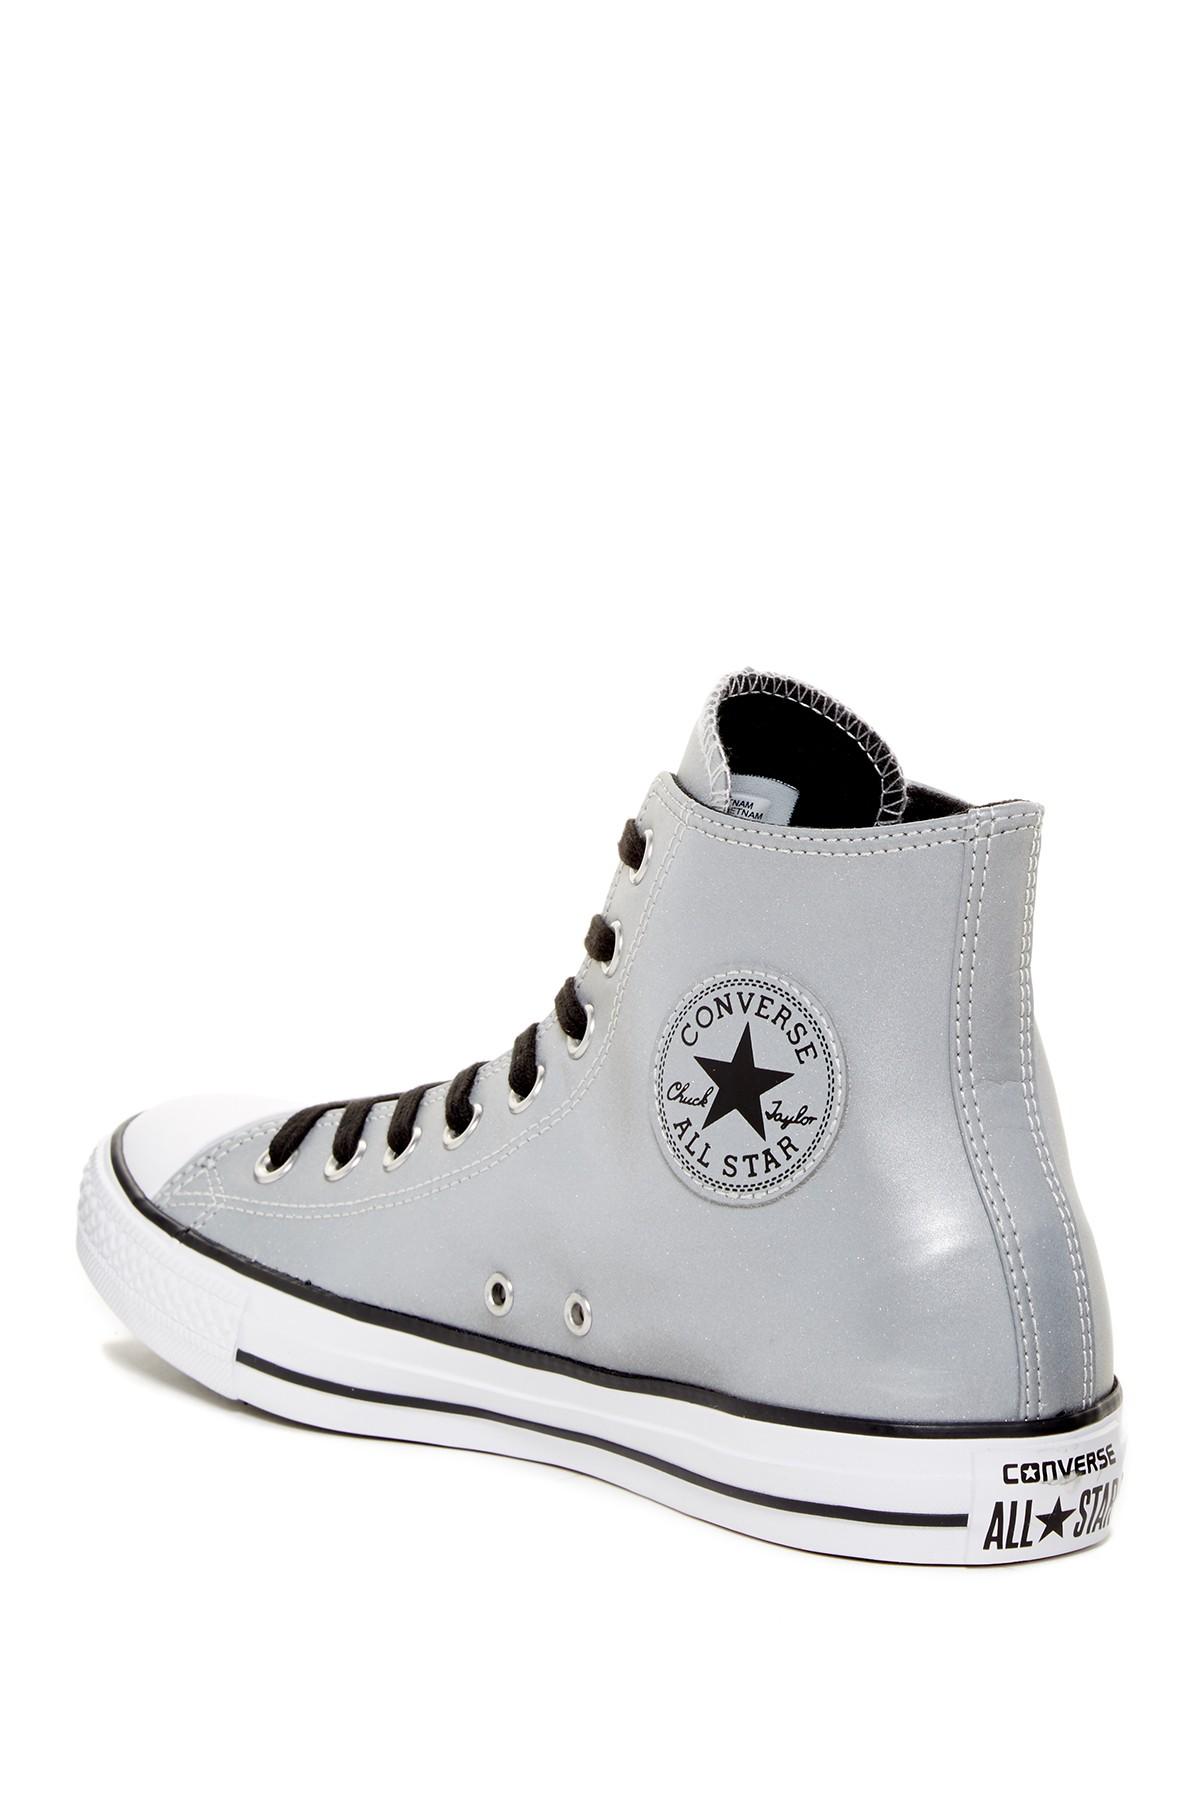 Converse Chuck Taylor All Star Reflective High Top Sneaker (unisex) in  Silver-Black-wh (Black) - Lyst